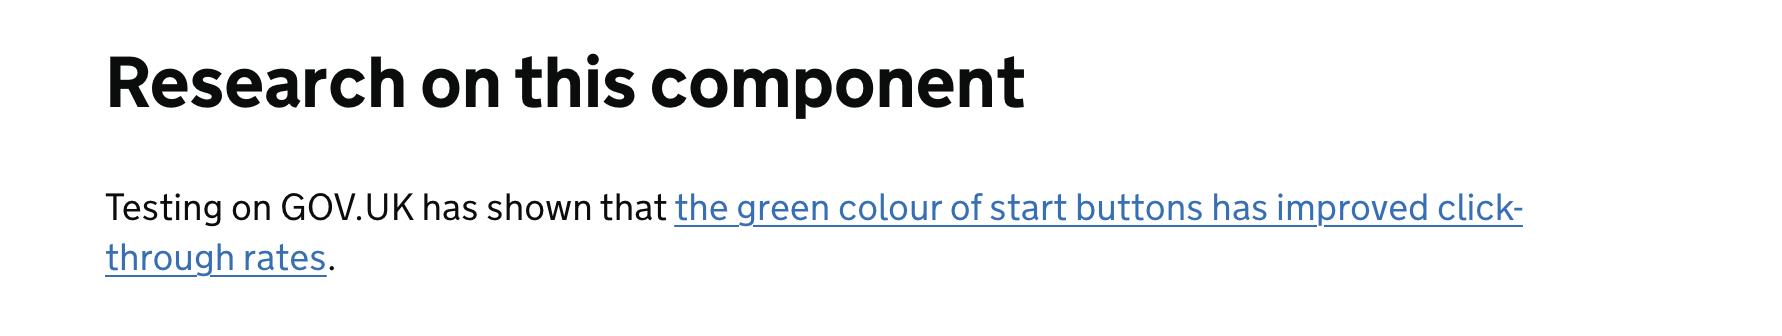 the button component only links to justification for the green colour of start buttons.